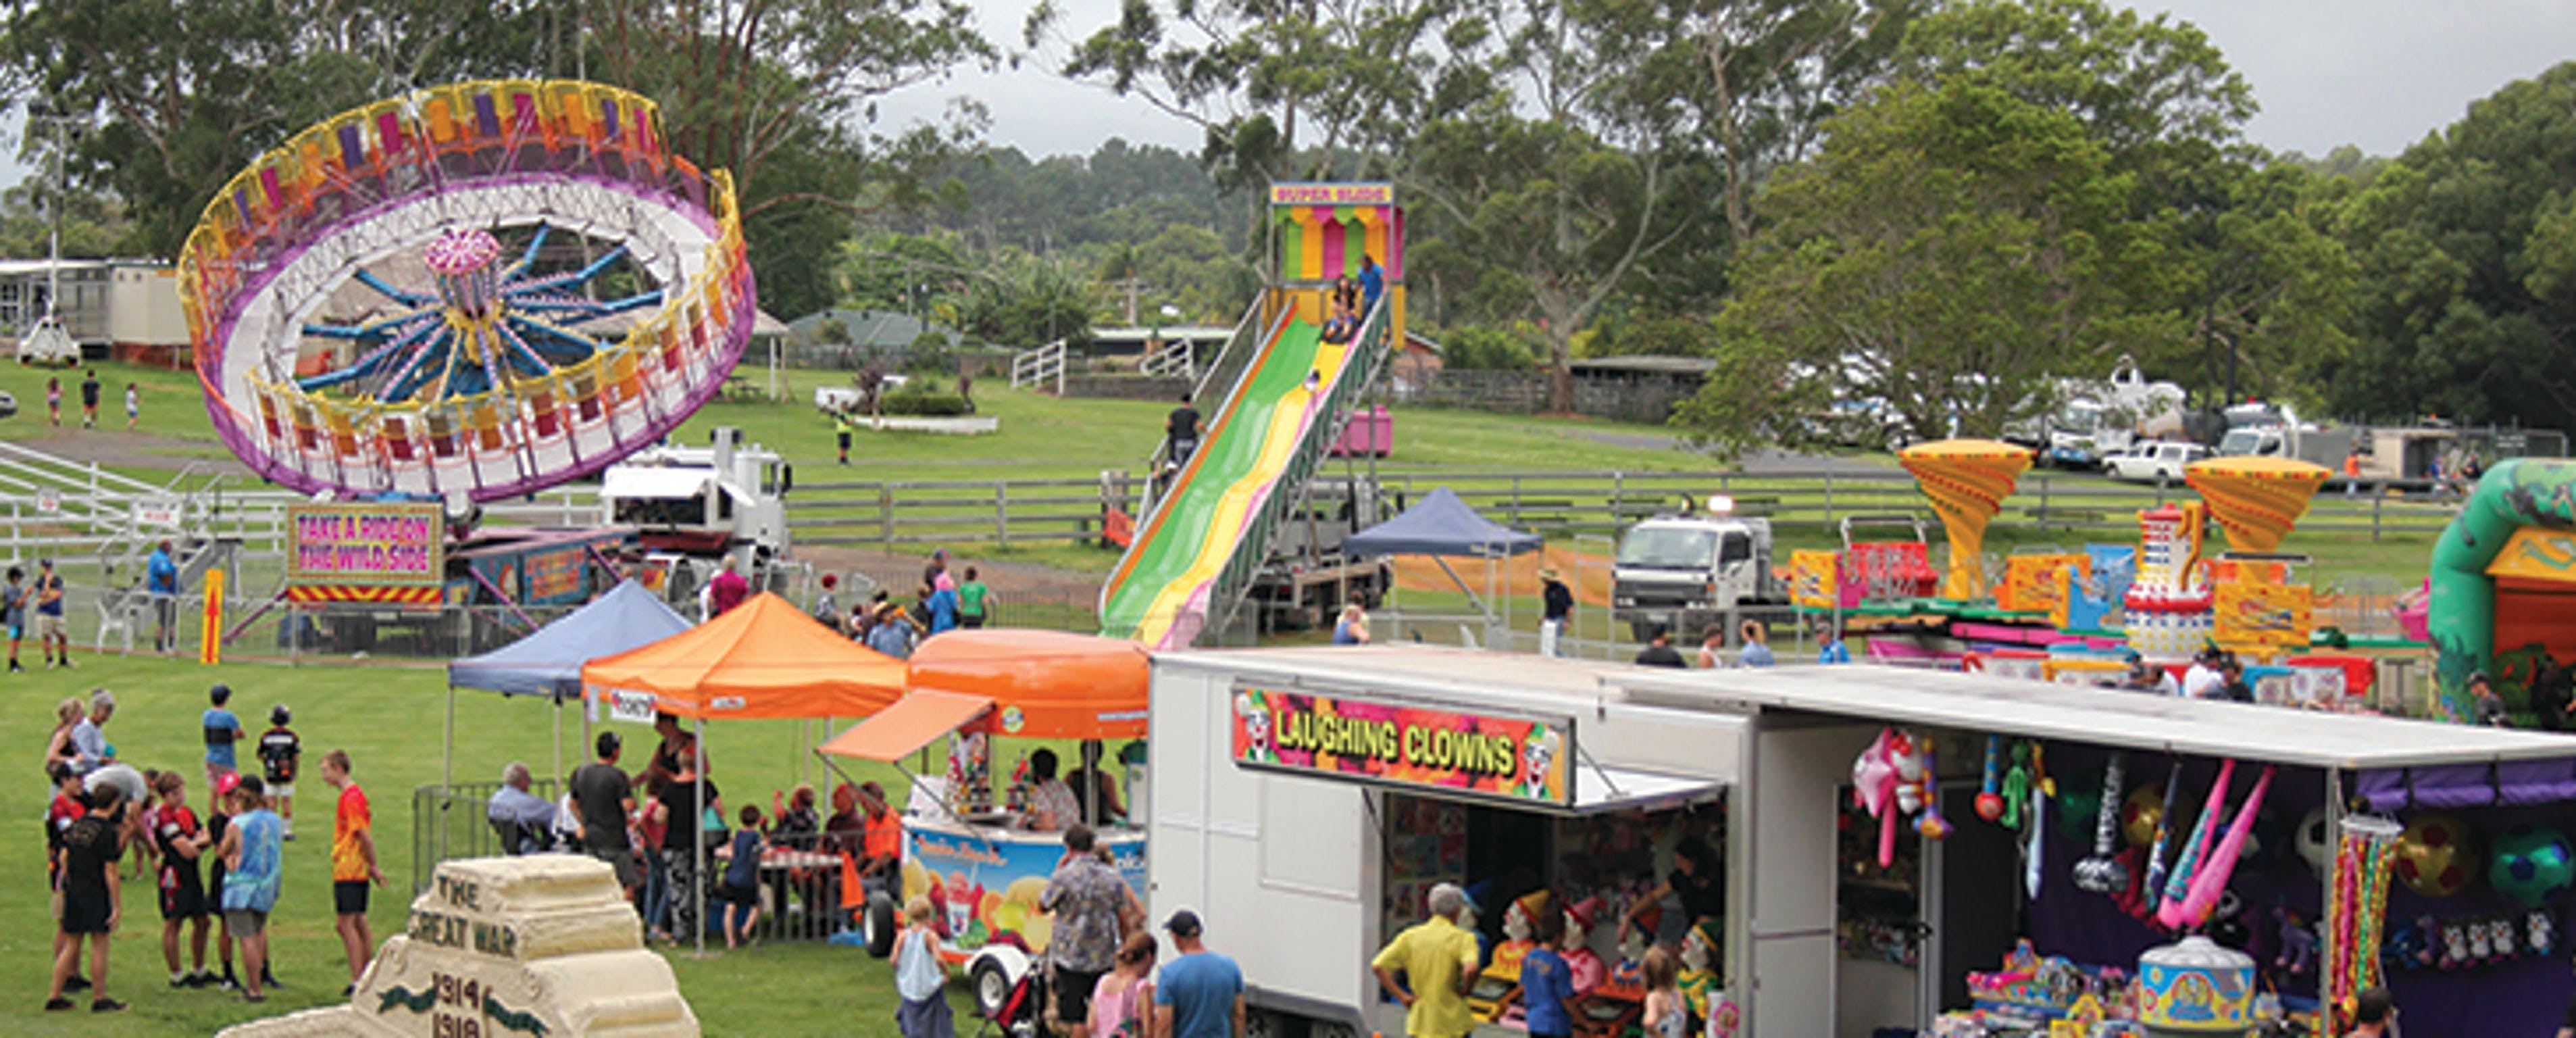 Alstonville Agricultural Society Show - Accommodation Bookings